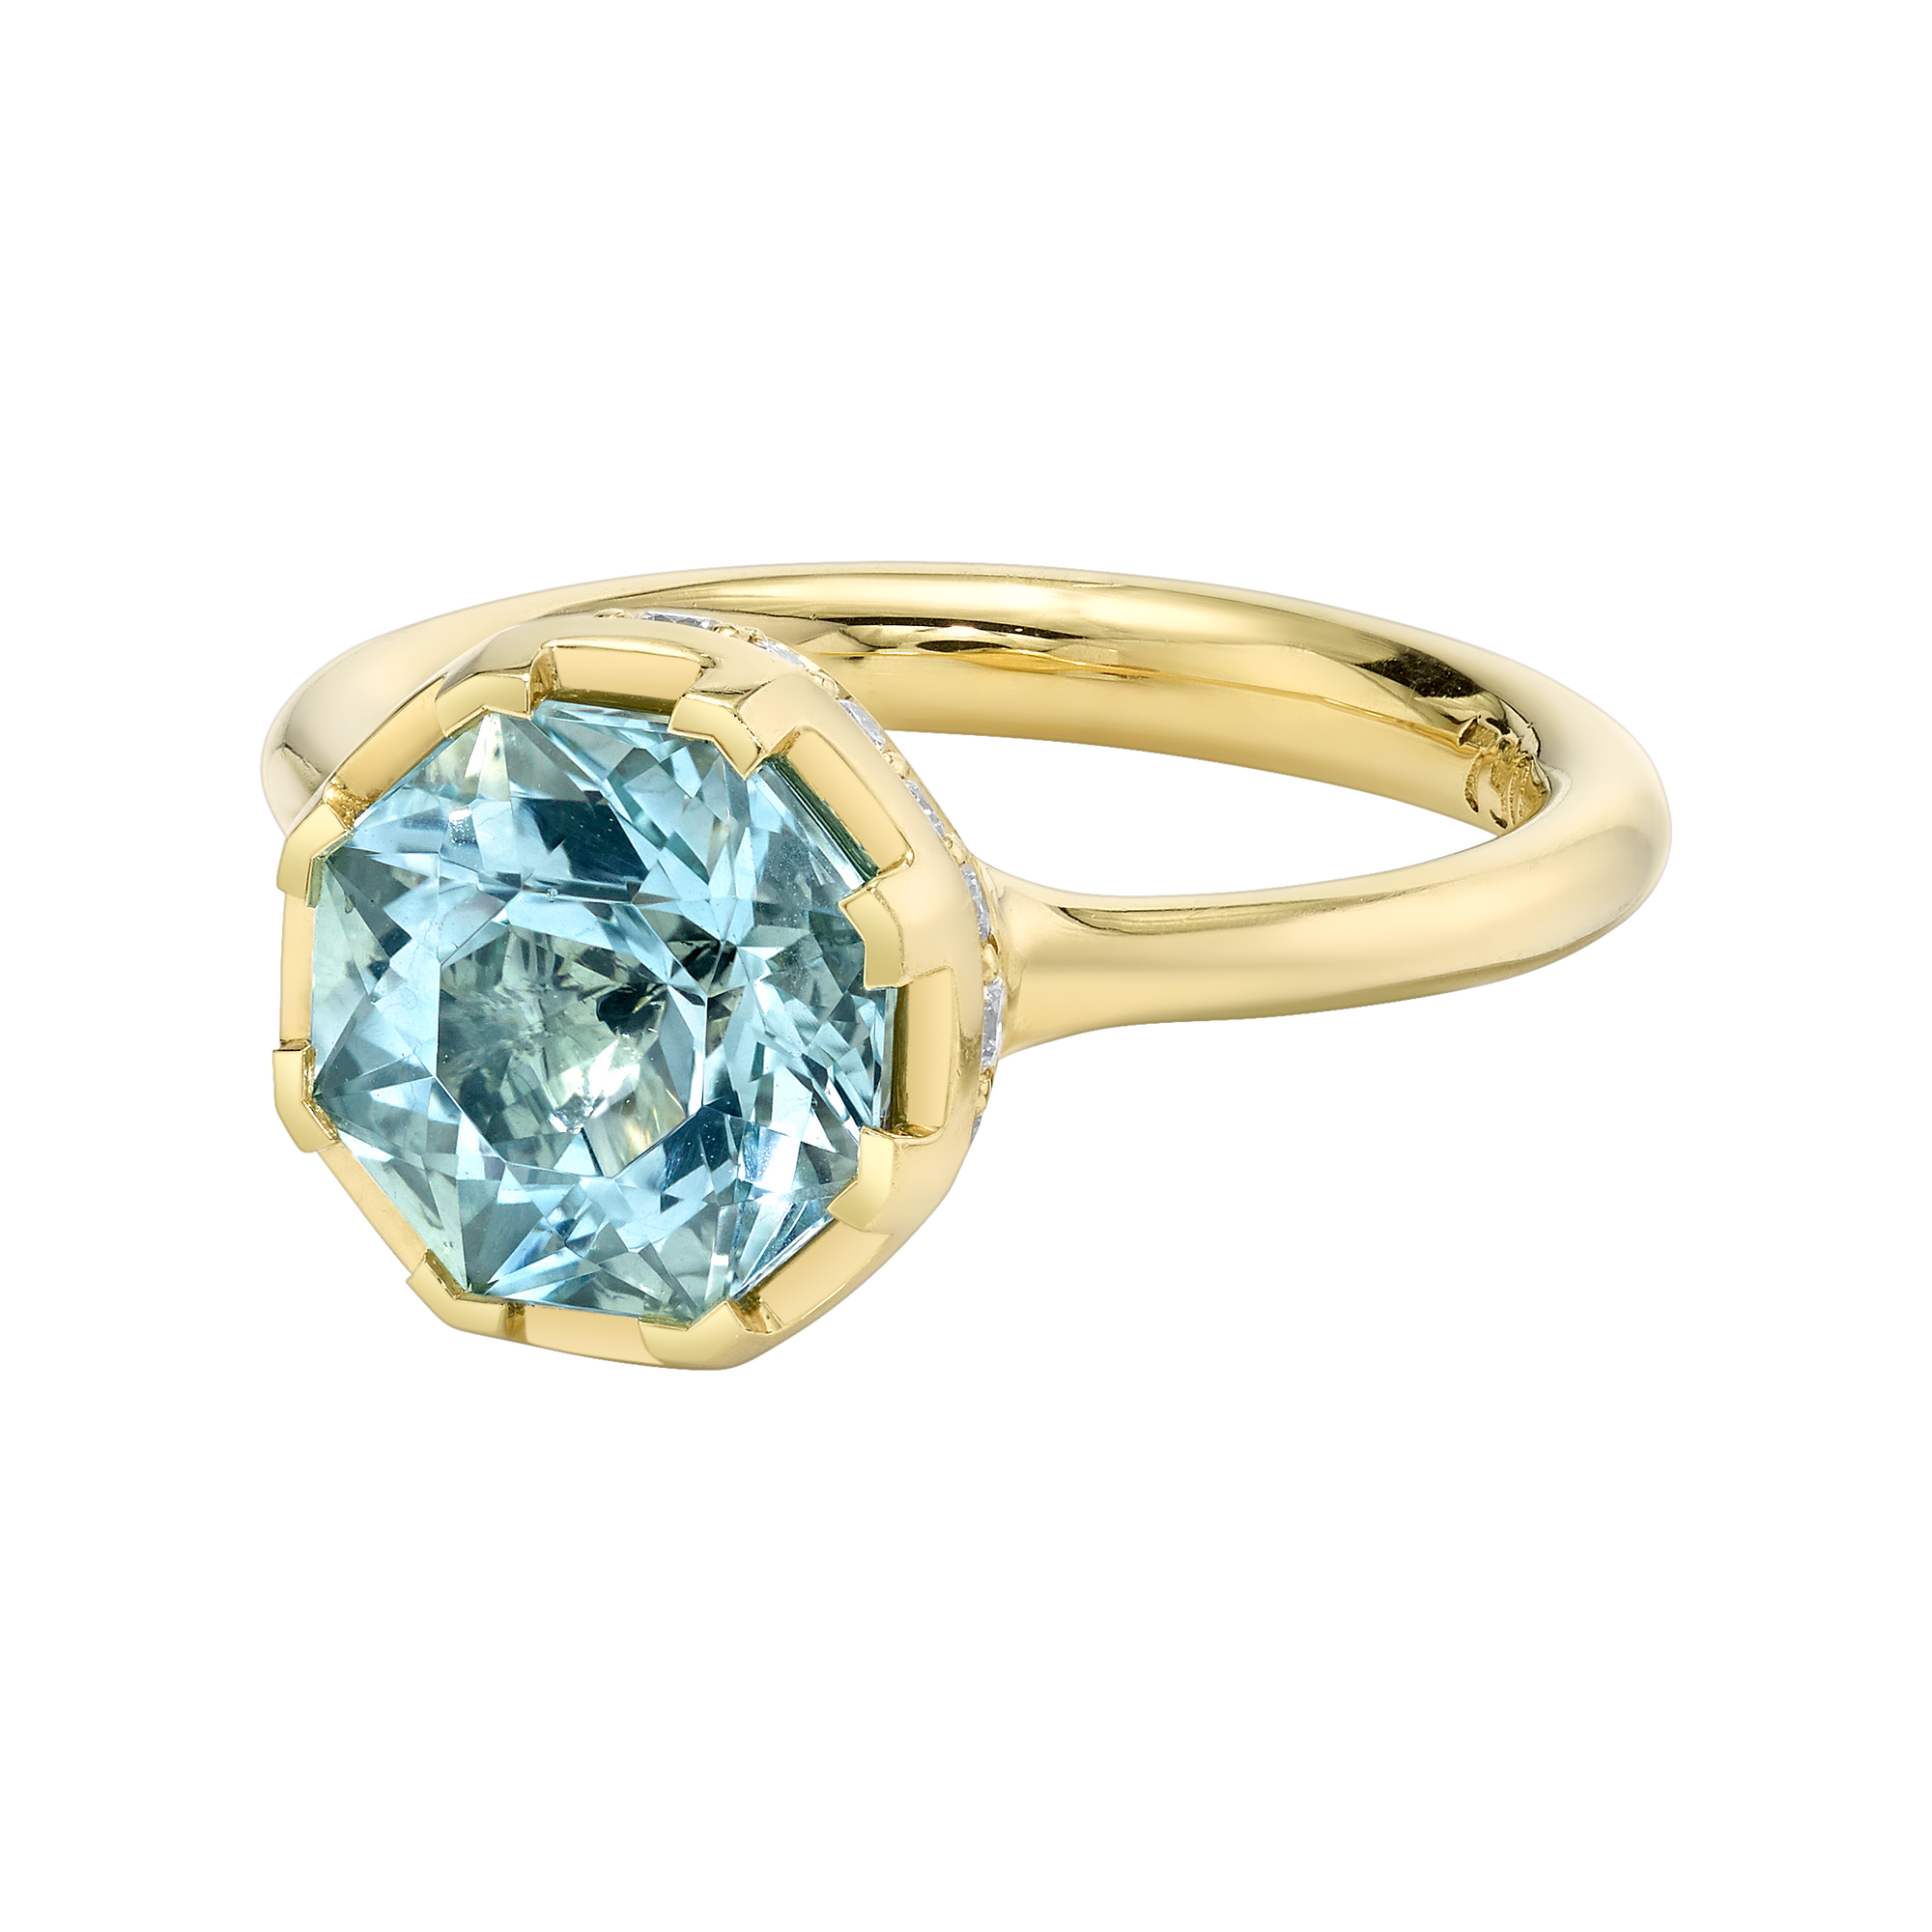 Sacred Shade Ring featuring a Precision-Cut Aquamarine with Diamond Pave